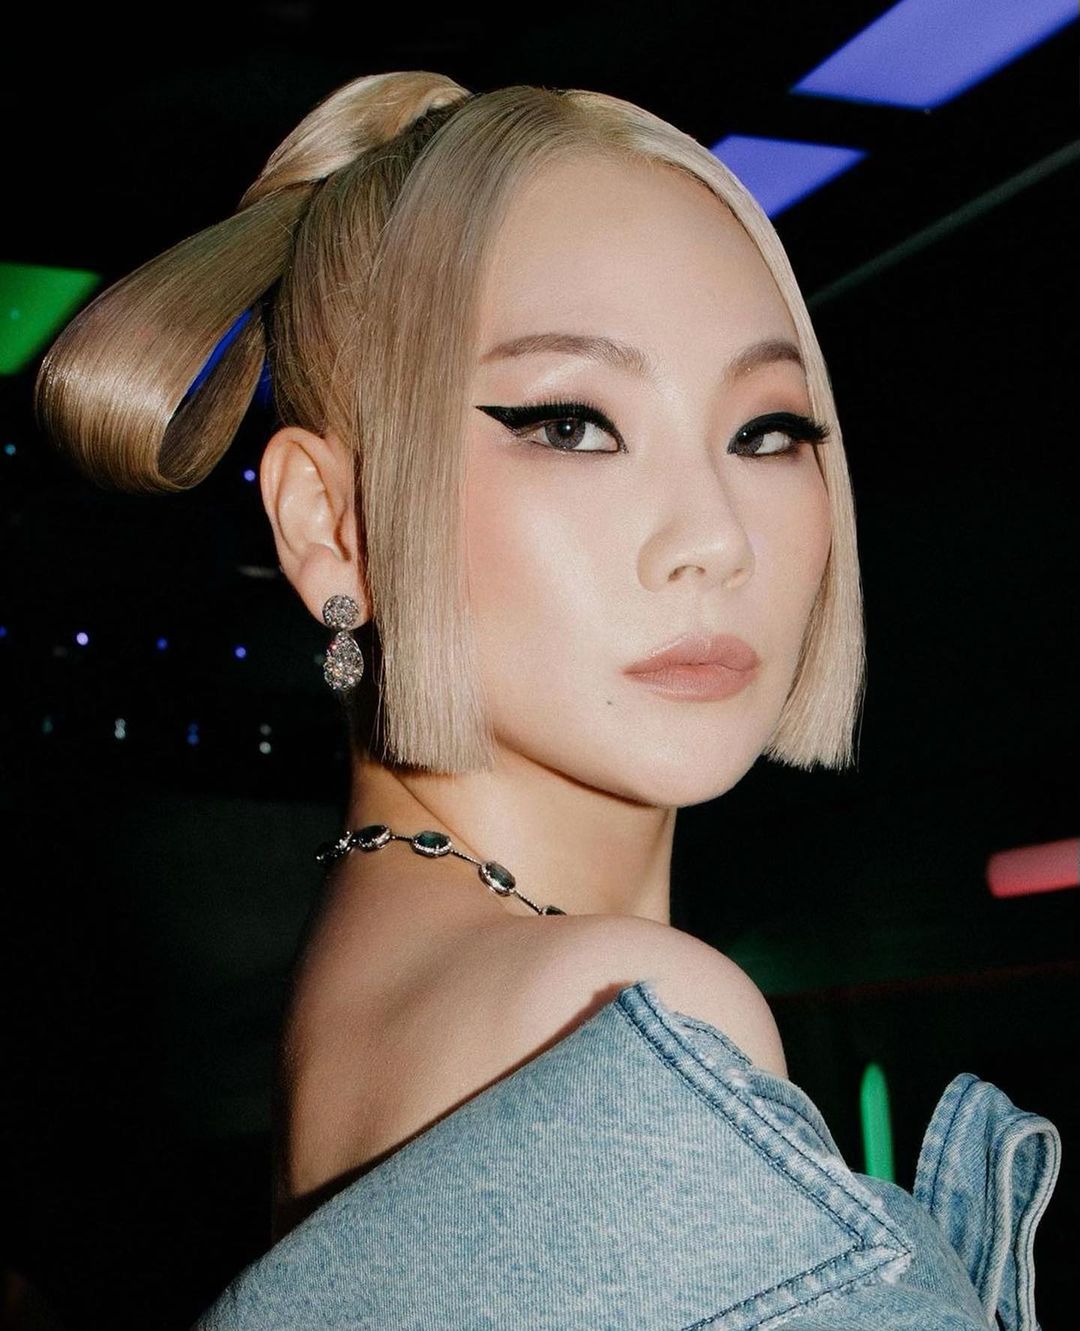 CL releases 'ALPHA' 2nd single 'Lover Like Me' on the 29th